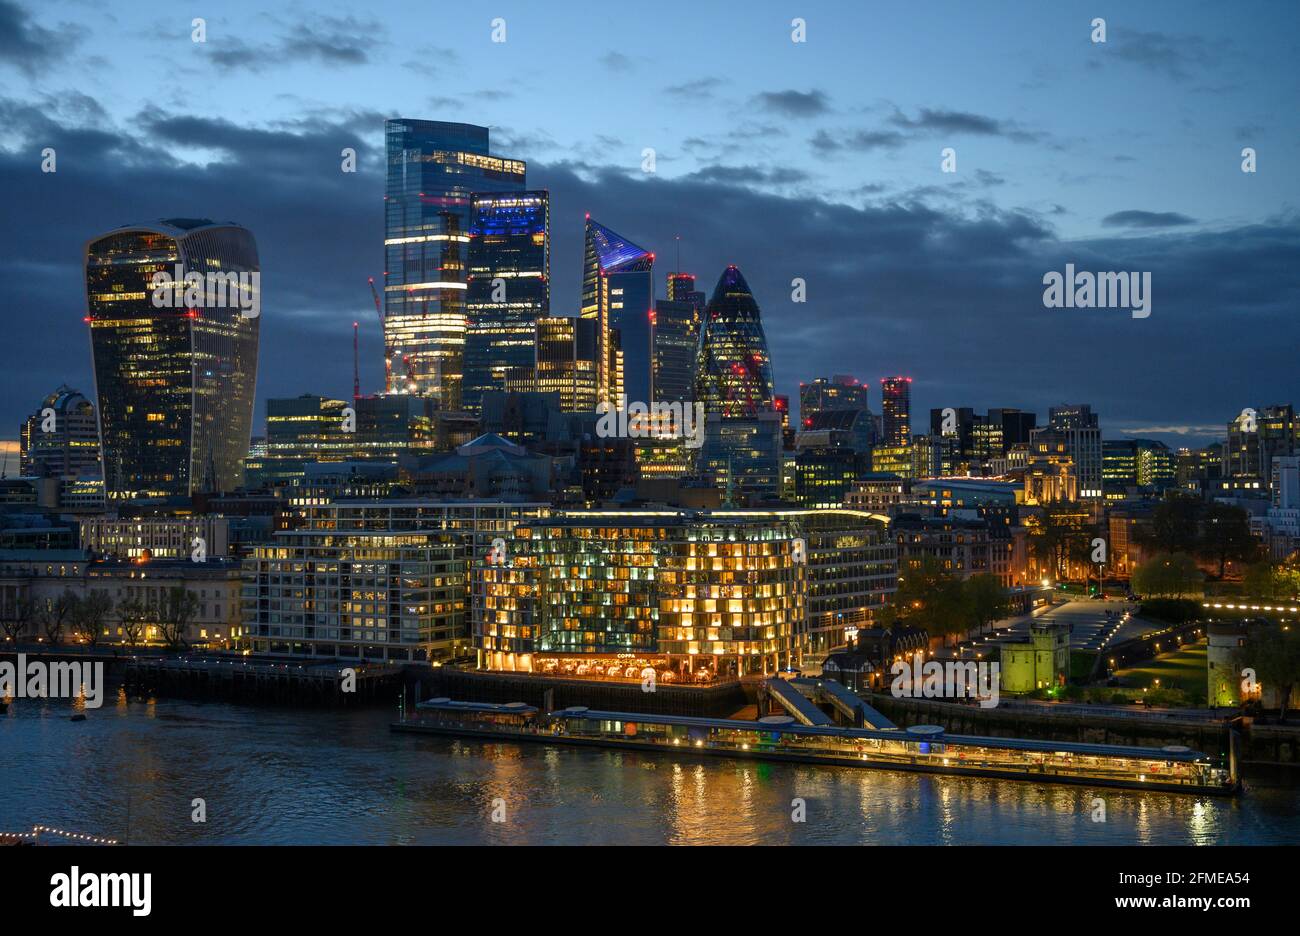 London, UK. 8 May 2021. London landmark buildings lit up on a clear night seen from the top of City Hall, Londons Living Room, as the 2021 Mayoral election count takes place. Credit: Malcolm Park/Alamy Live News. Stock Photo